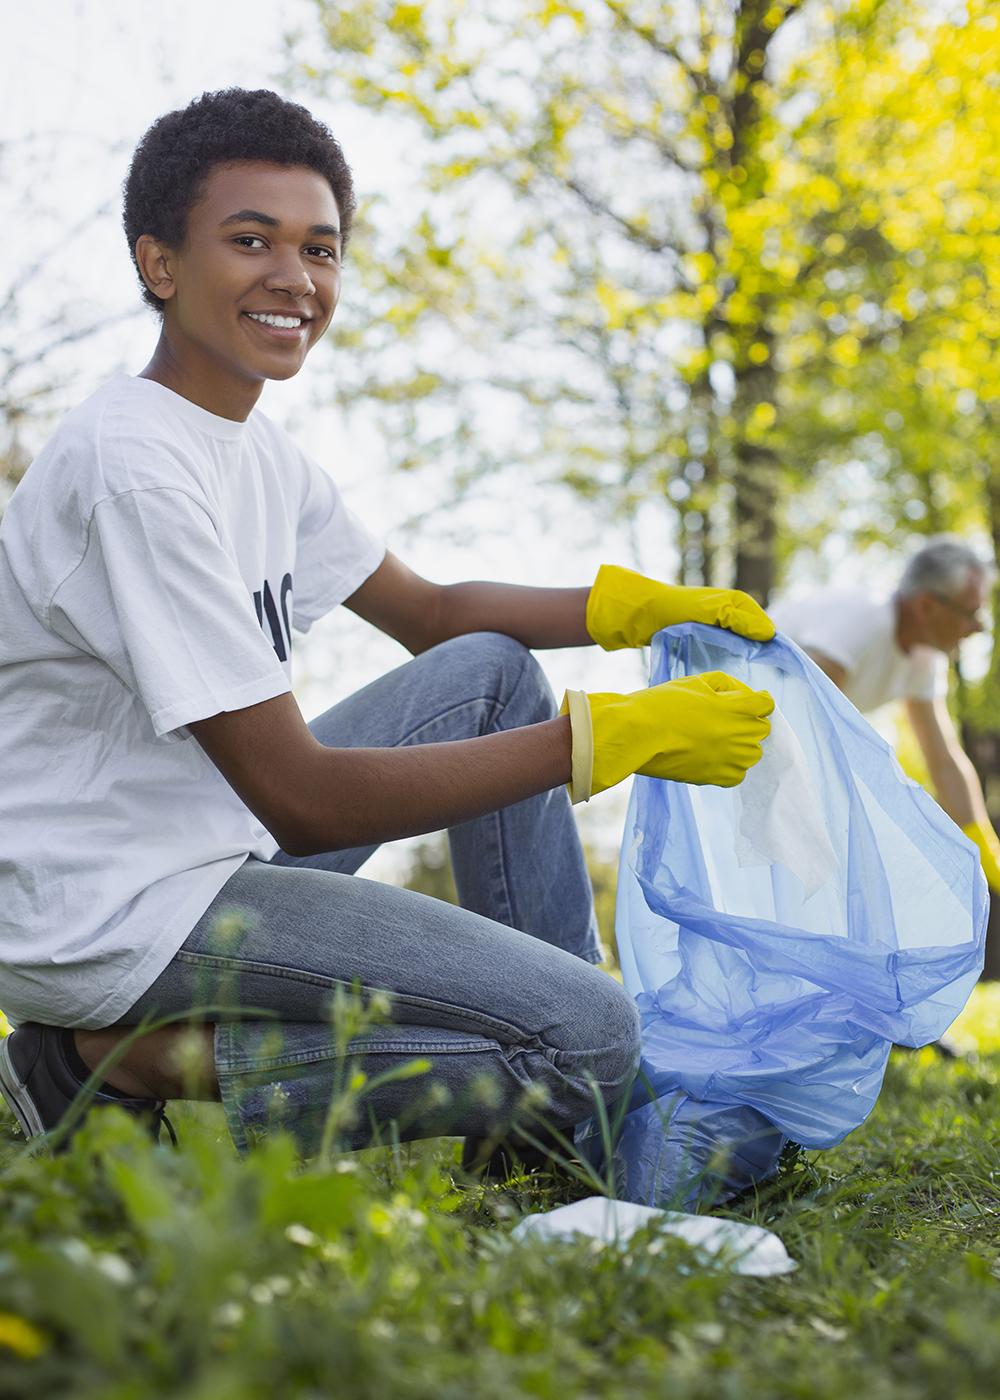 Boy holding a bag wearing white shirt and yellow gloves.